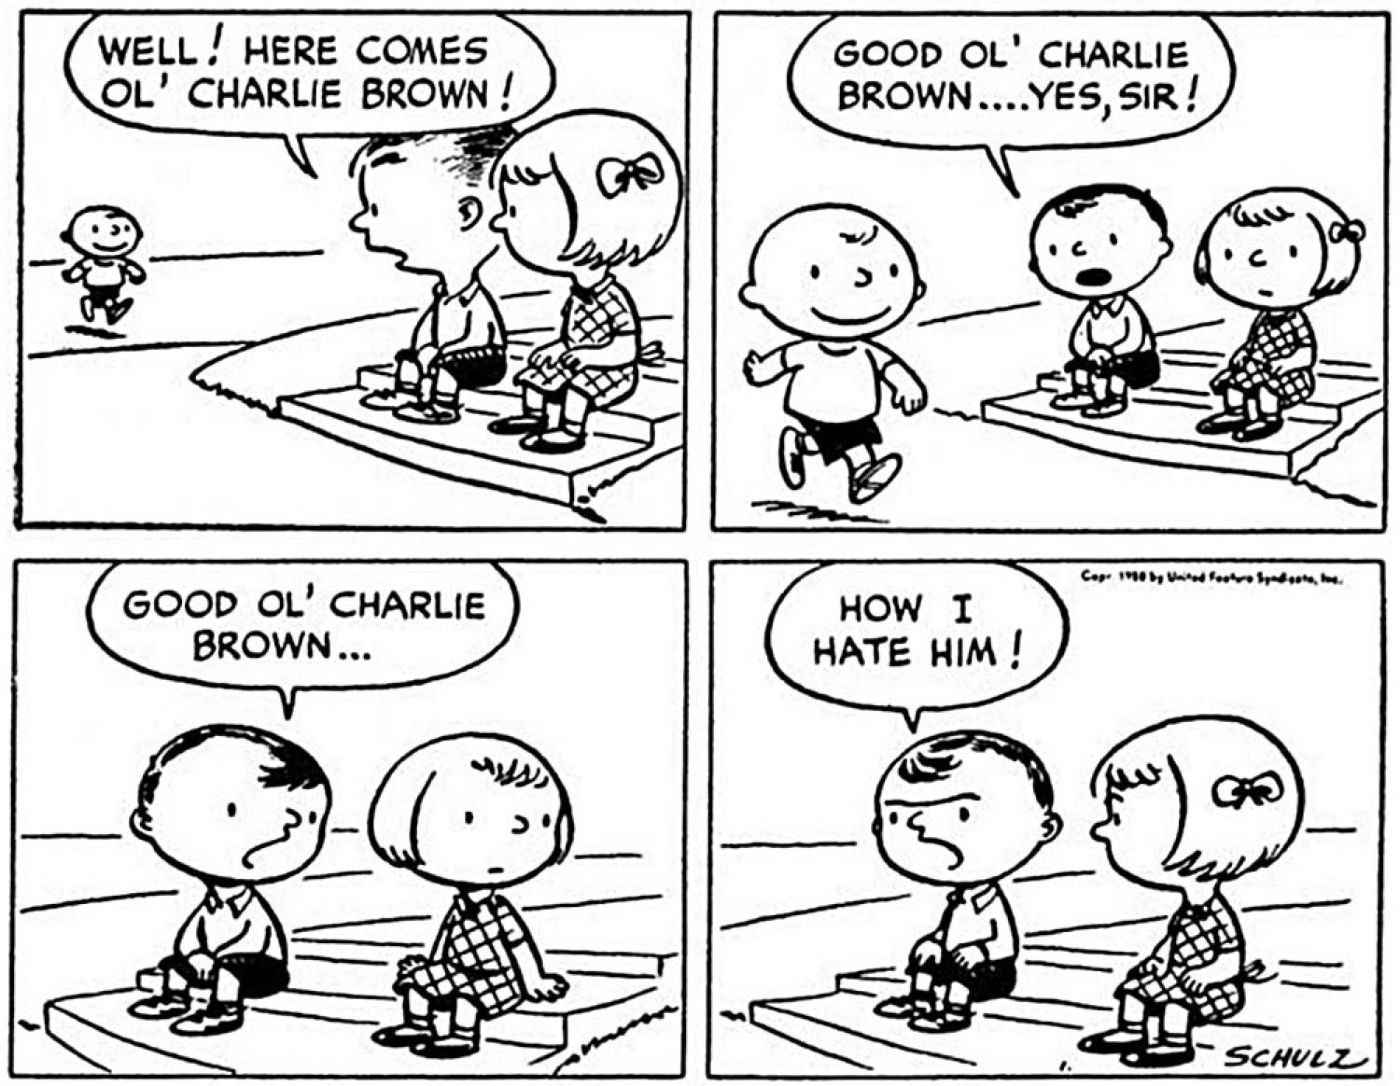 Charlie Brown's First Appearance in Peanuts